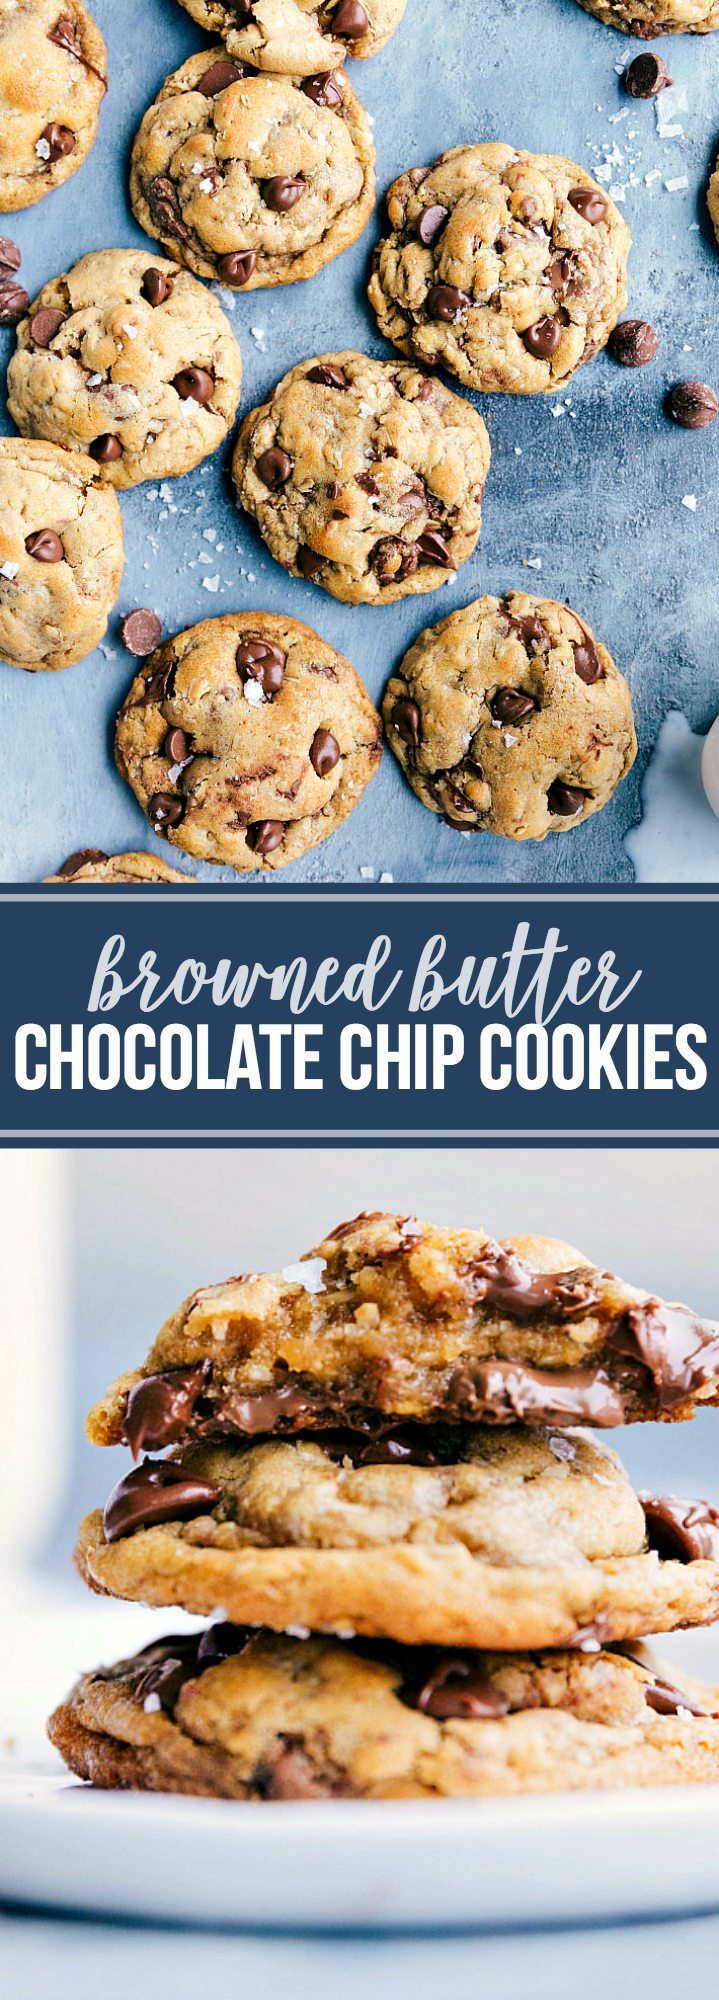 The ultimate BEST EVER brown butter chocolate chip cookies! Everyone goes CRAZY for these! Recipe via chelseasmessyapron.com | #browned #butter #chocolate #chip #cookies #best #dessert #treat #easy #oat #oatmeal #chocolatechips